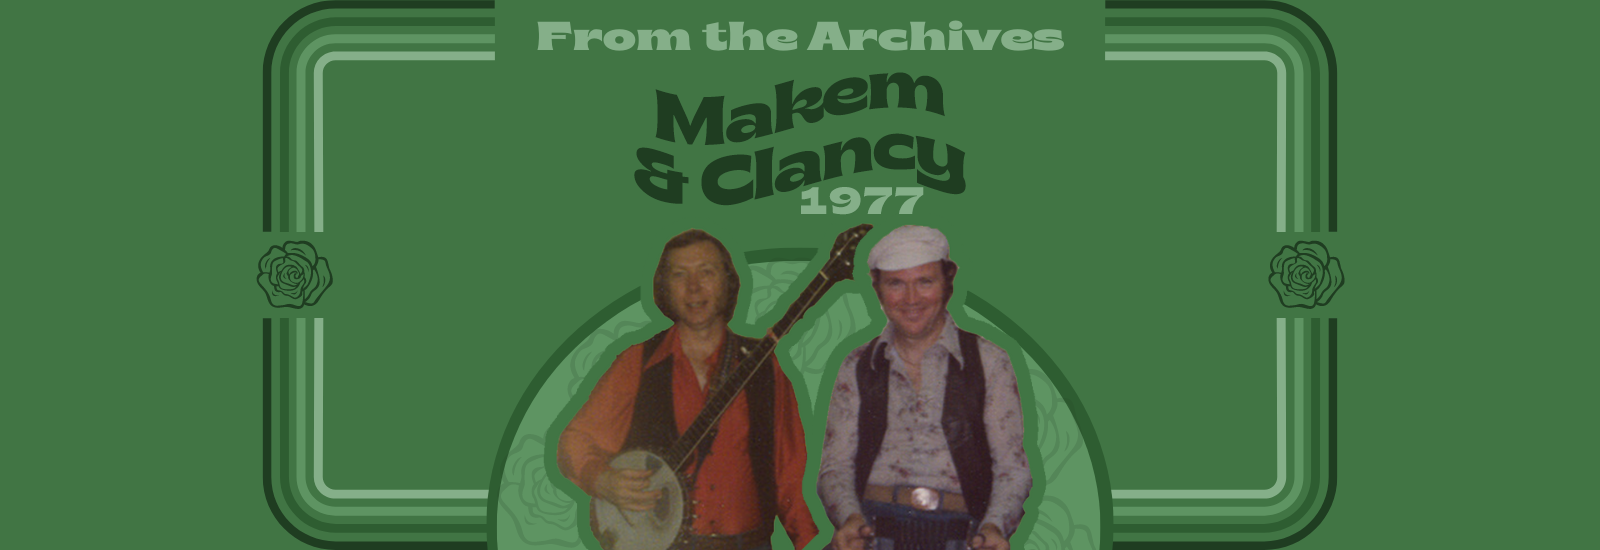 Makem and Clancy 1977 #109